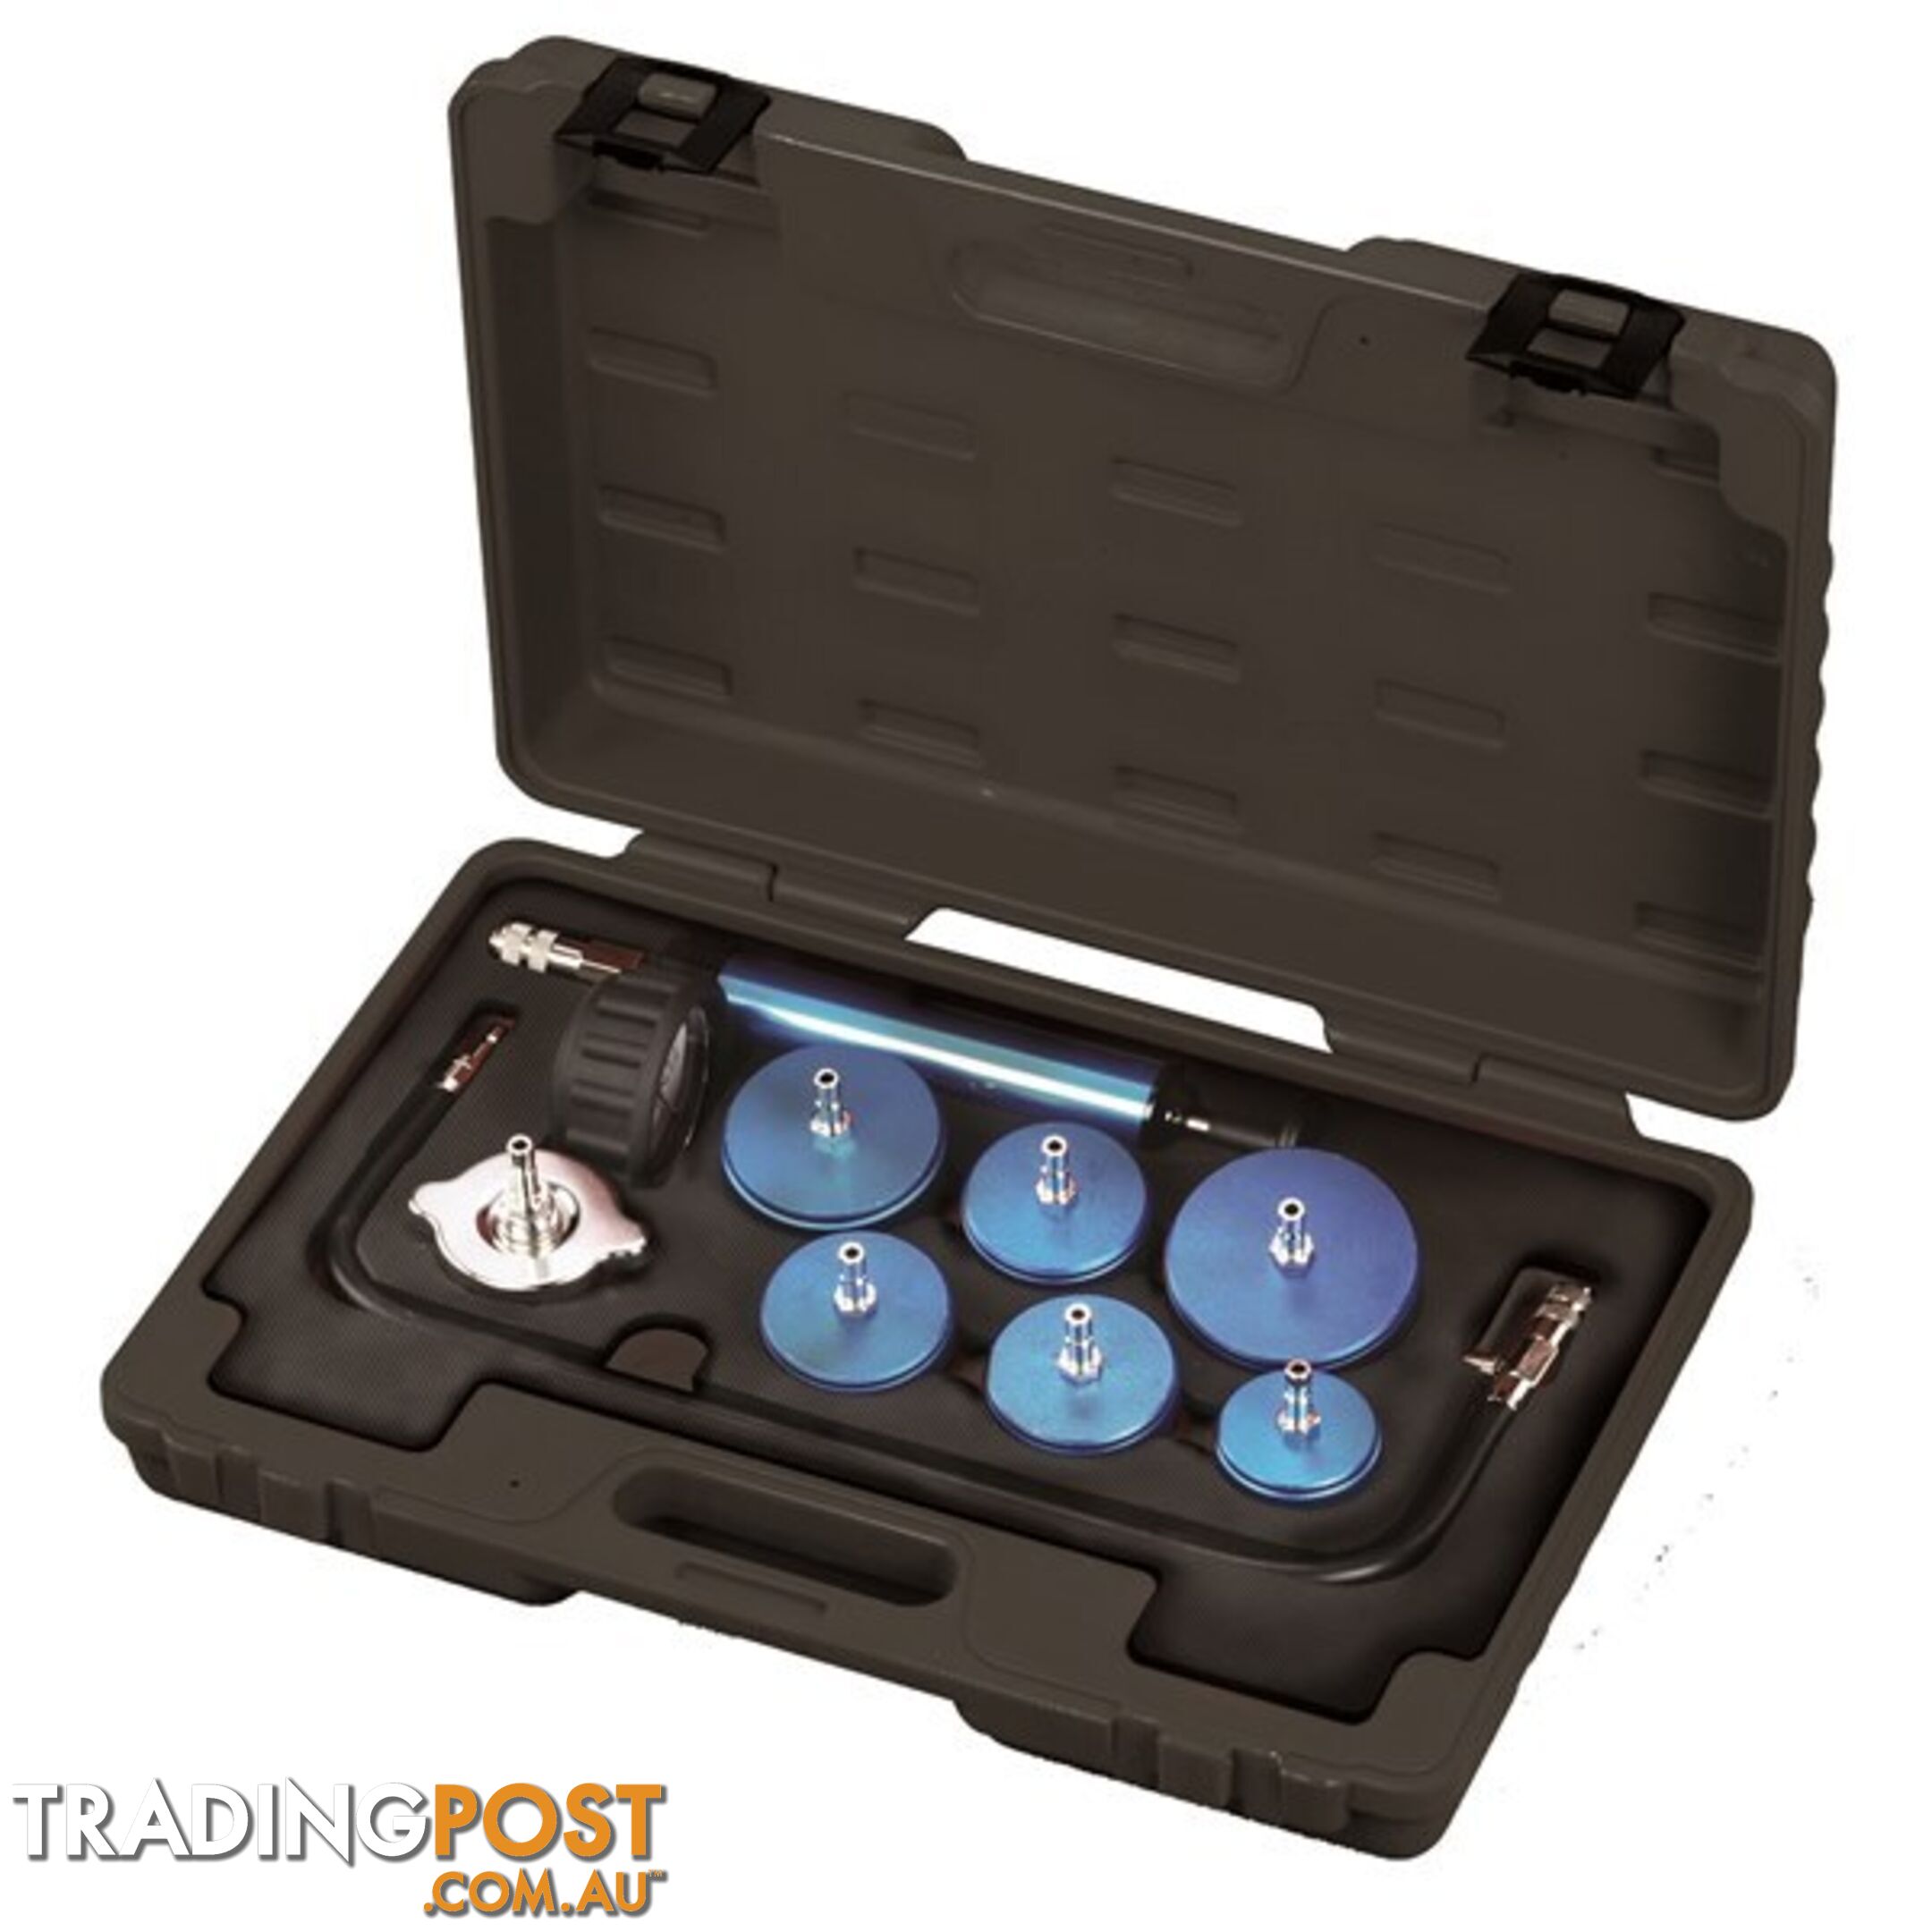 Cooling System Tester Heavy Goods Vehicle  - 9 Pc SKU - 308390